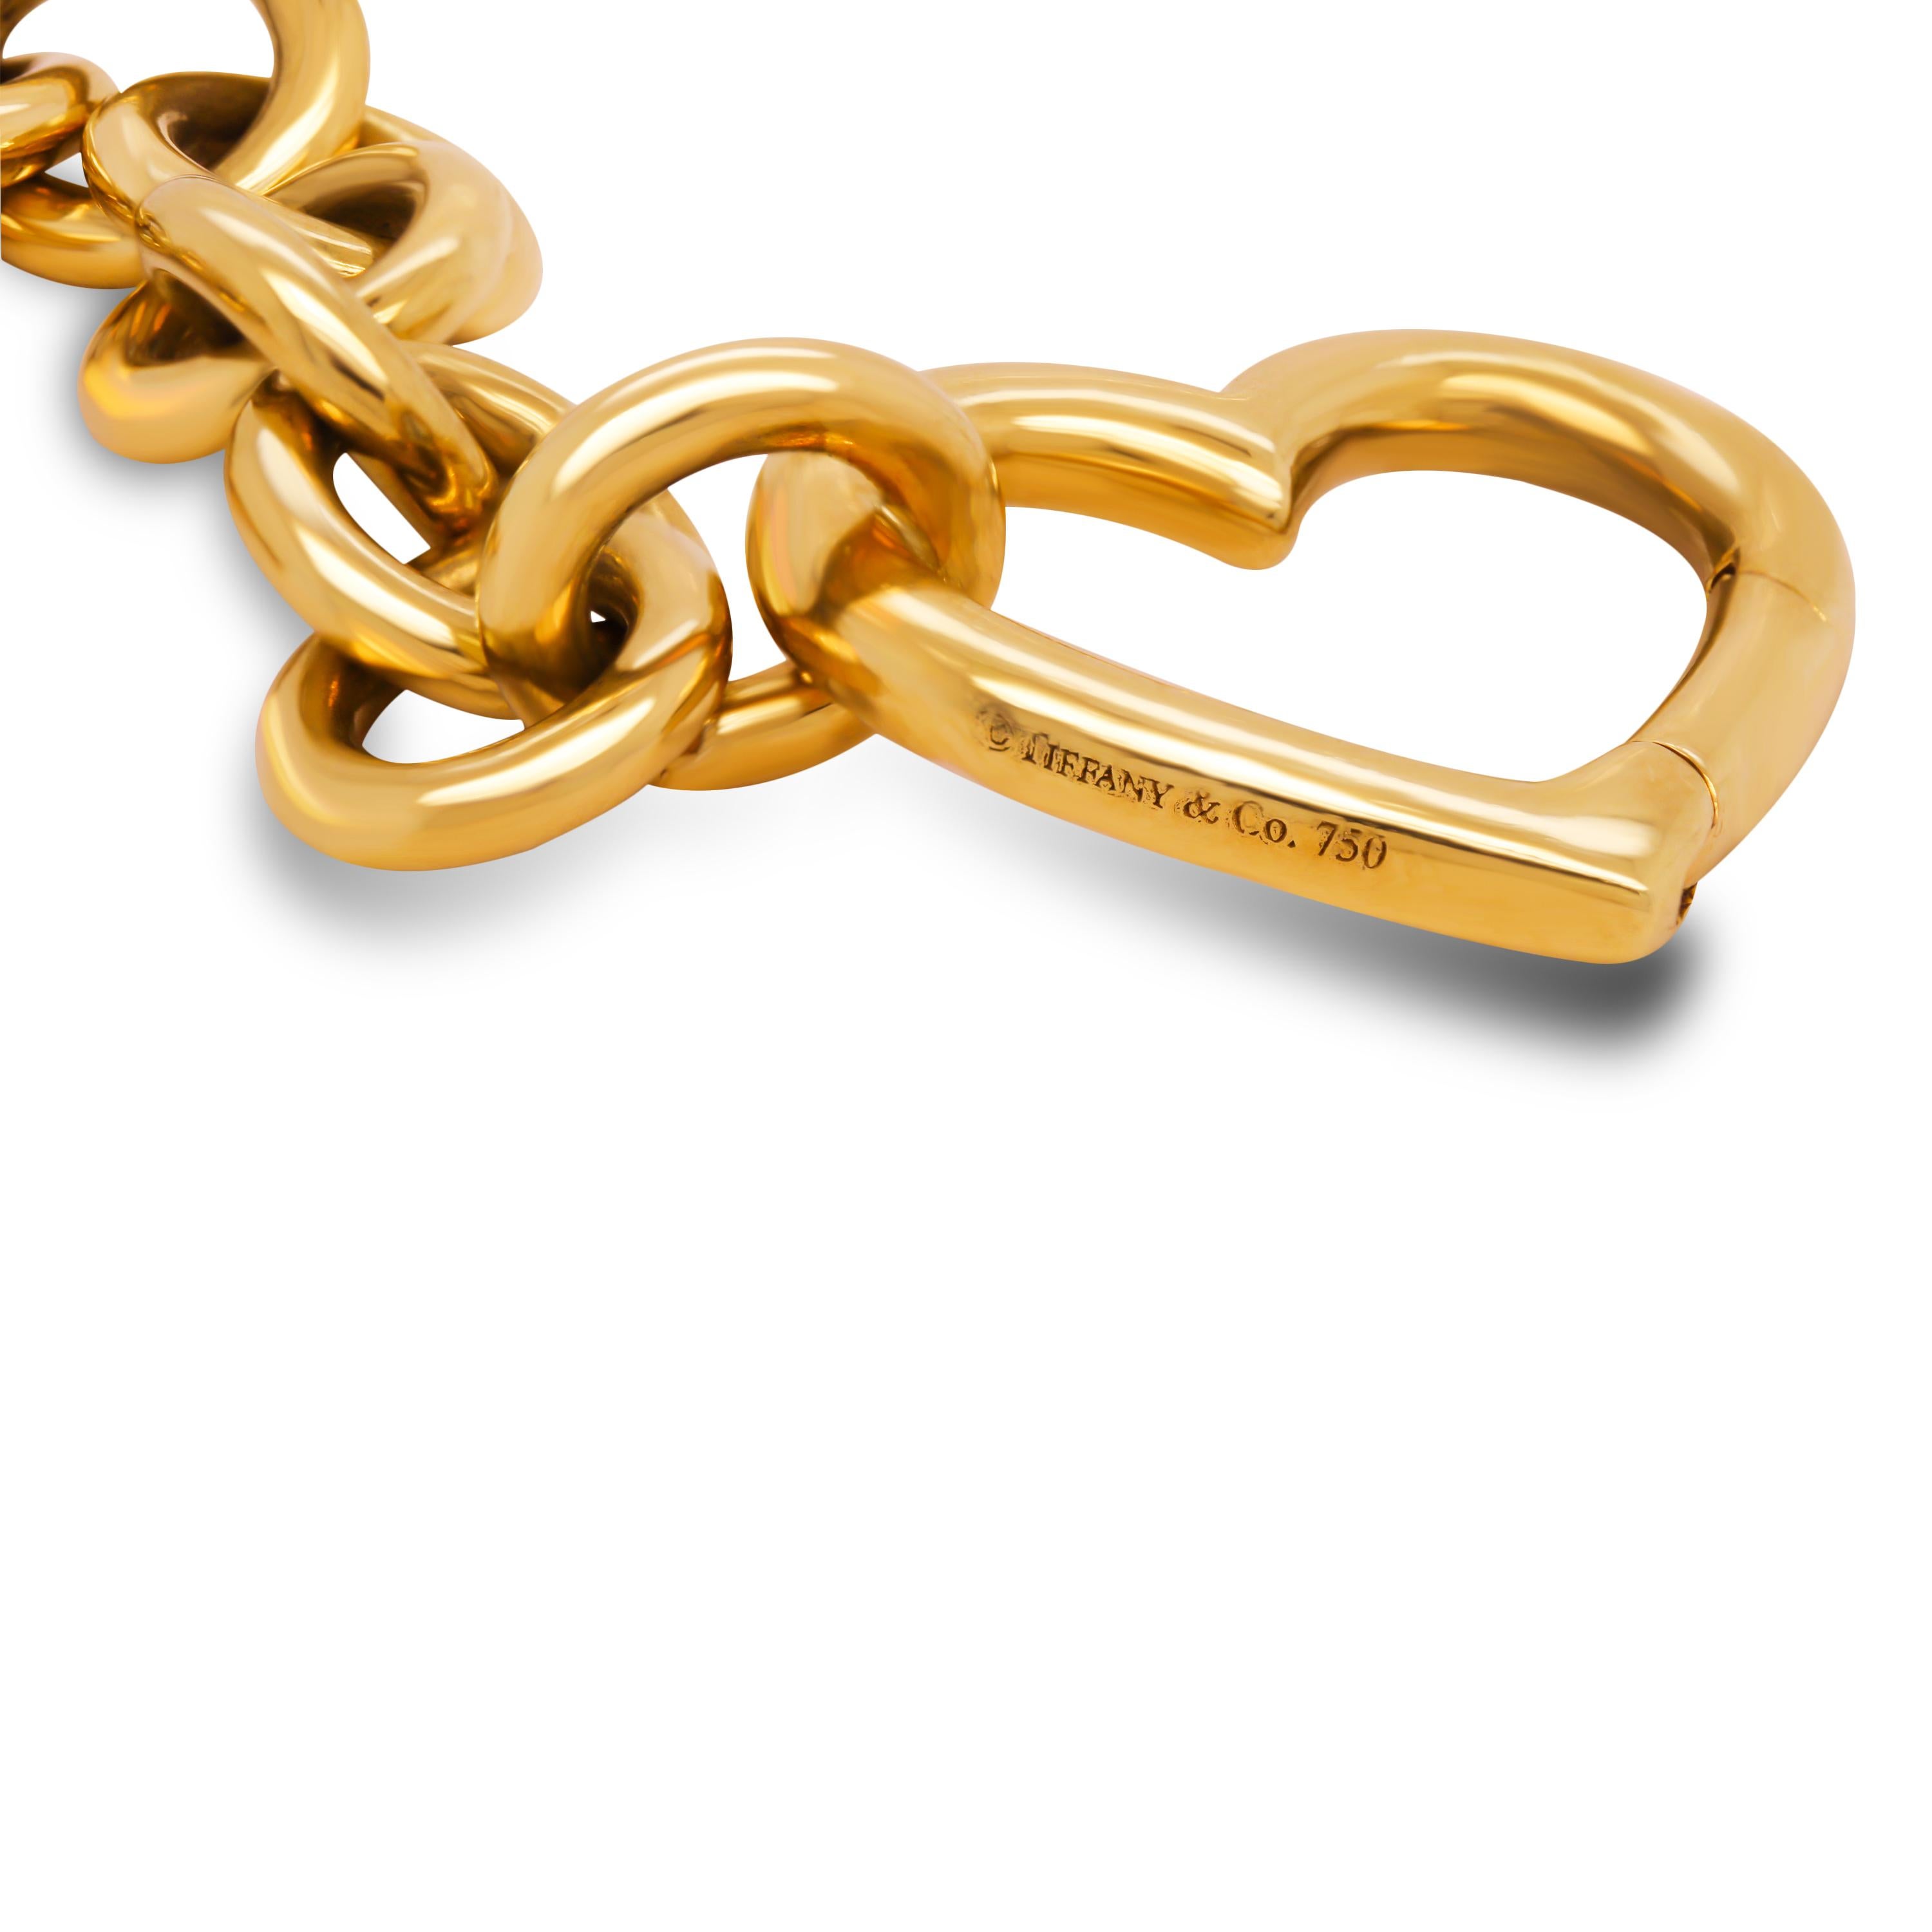 Tiffany & Co. Elsa Peretti 18K Yellow Gold Open Heart Charm Link Bracelet

Bracelet is crafted in solid 18k yellow gold with large style links and the signature open heart charm.

The charm locks and unlocks which allows the bracelet to clasp on